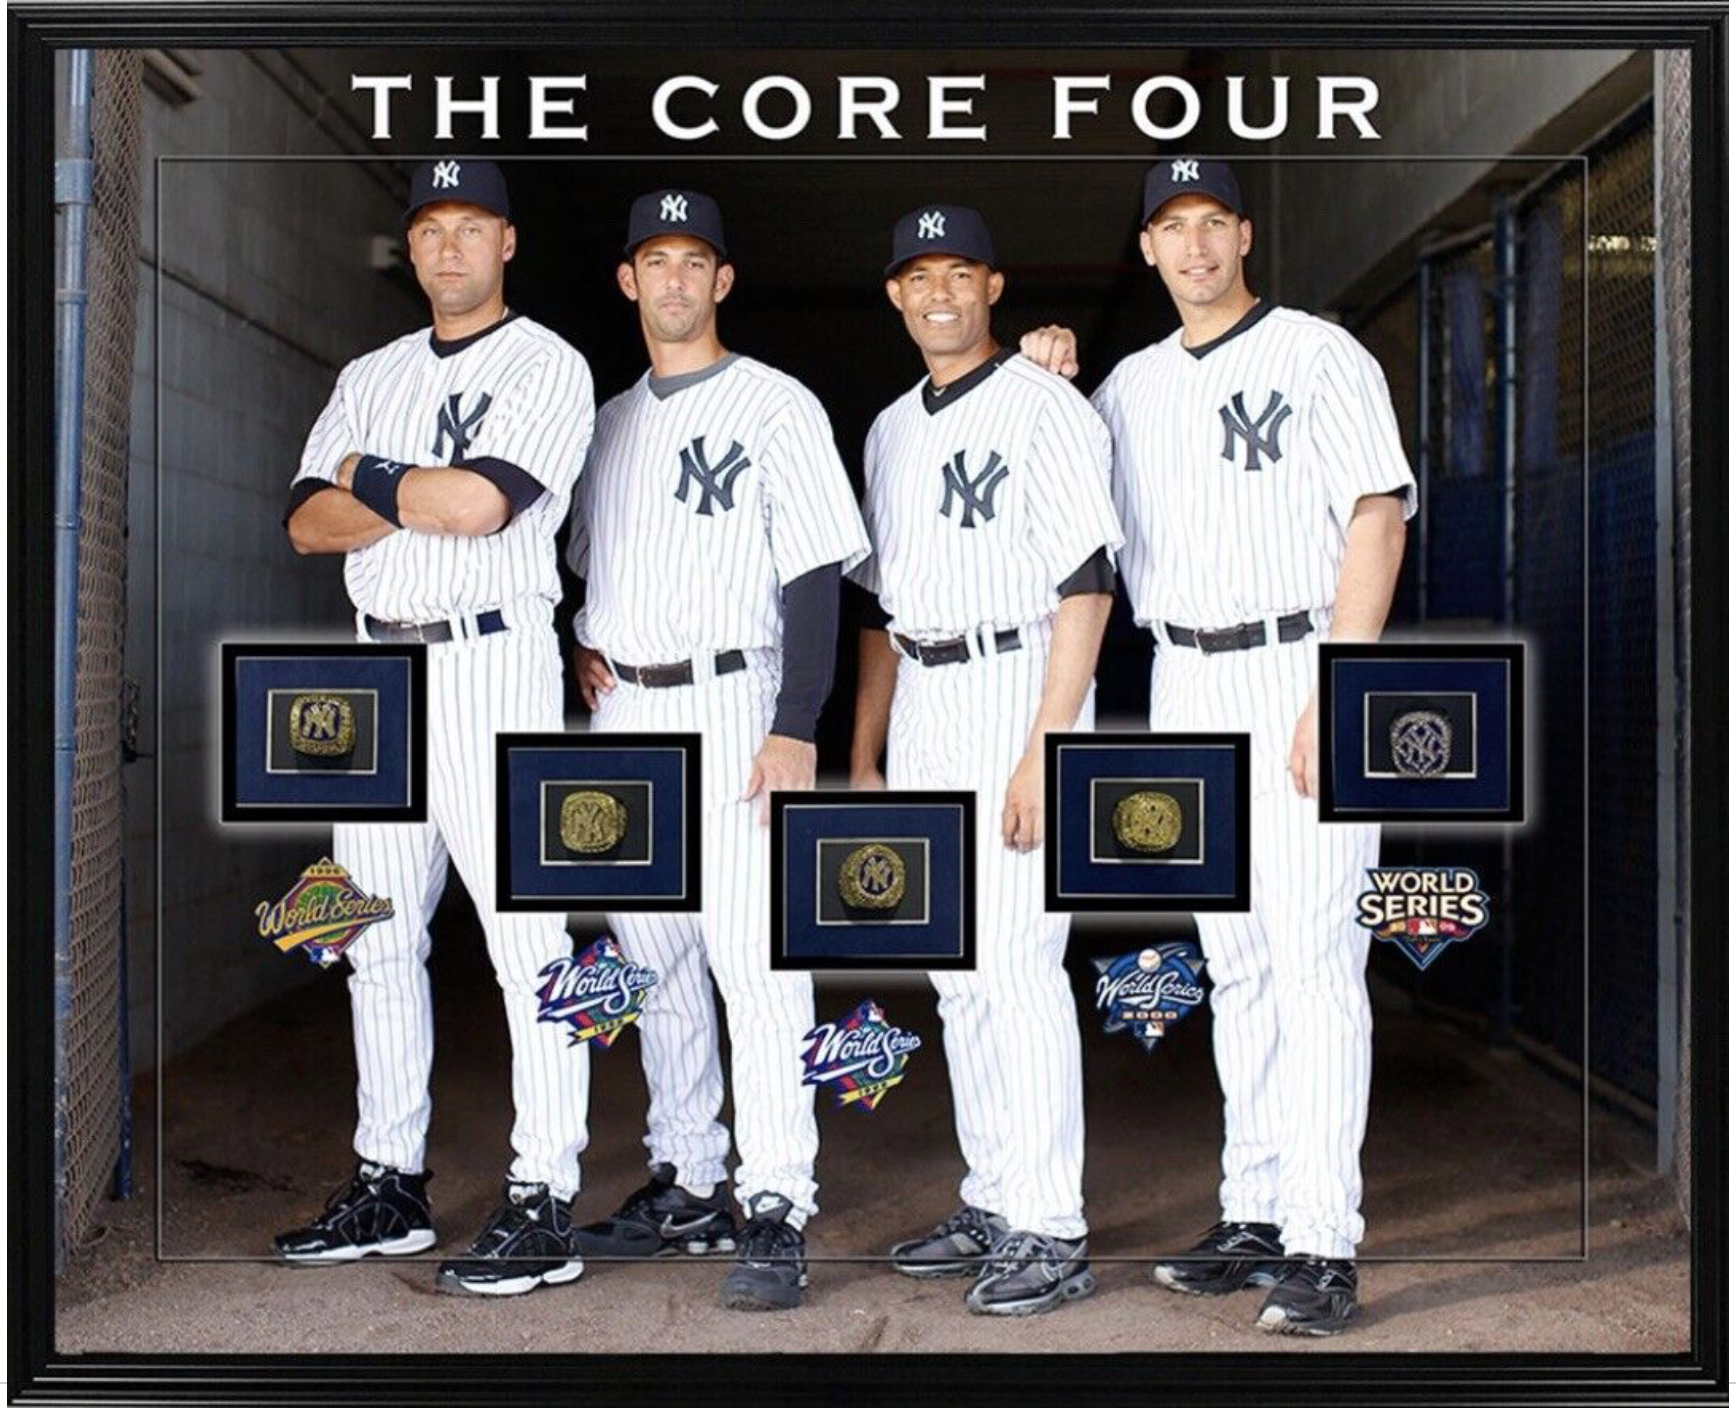 The Next 'Core Four' For The New York Yankees?